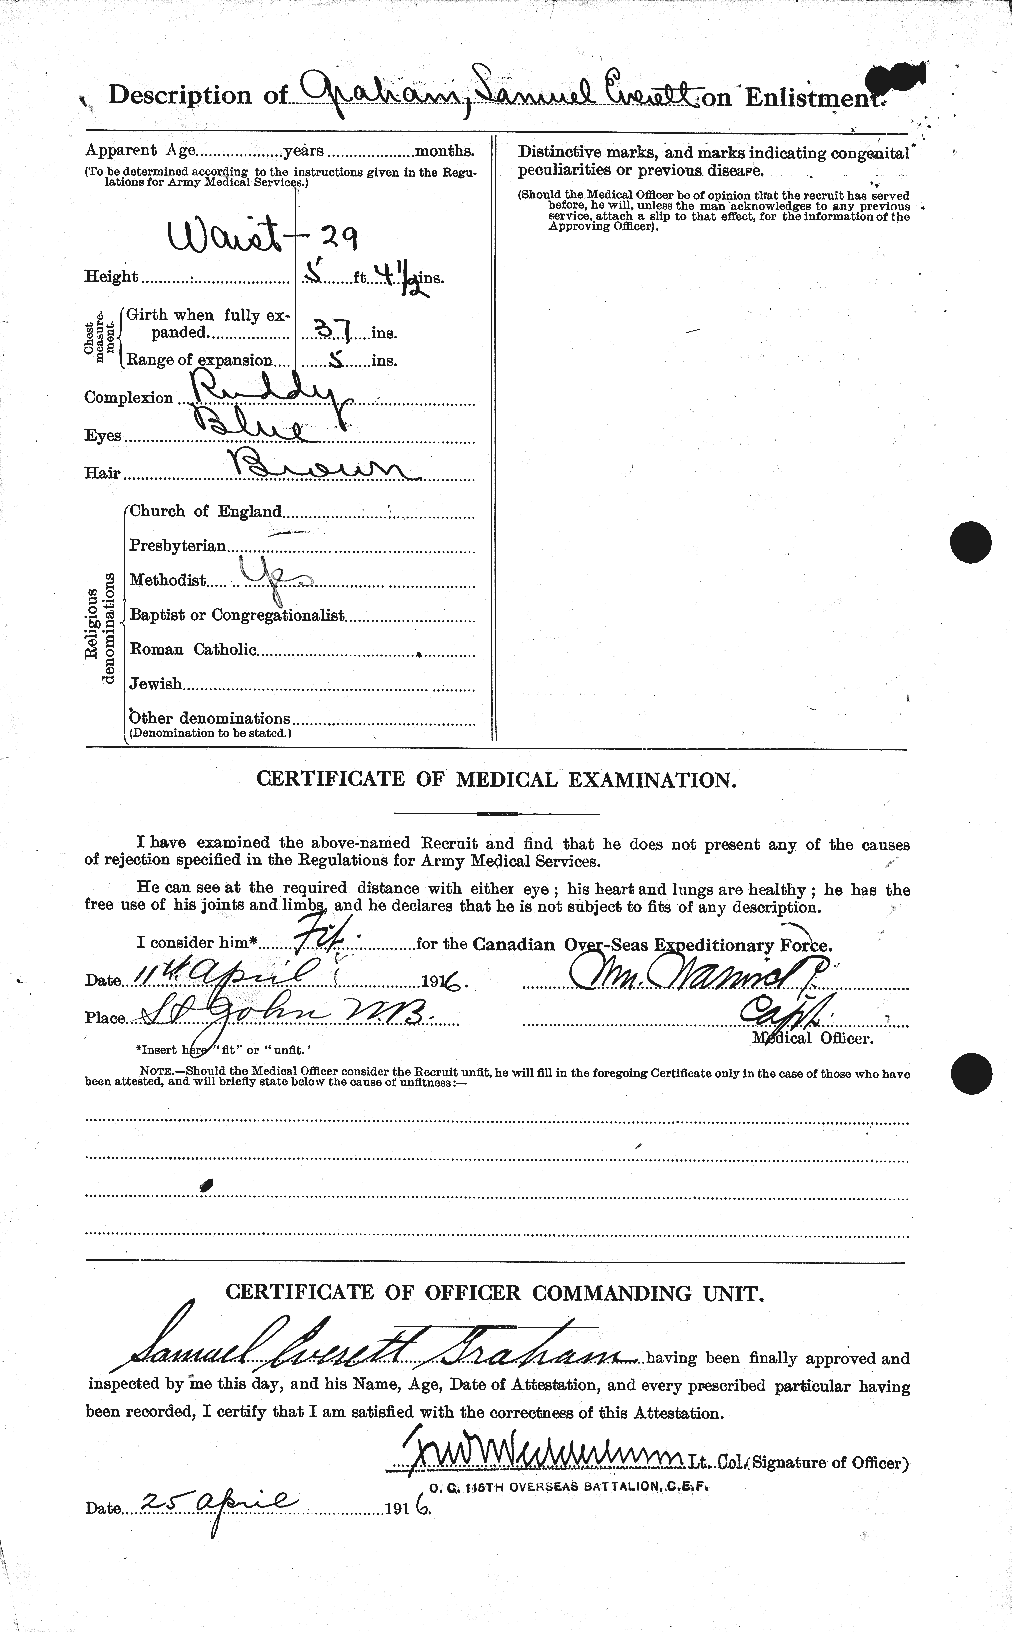 Personnel Records of the First World War - CEF 359455b